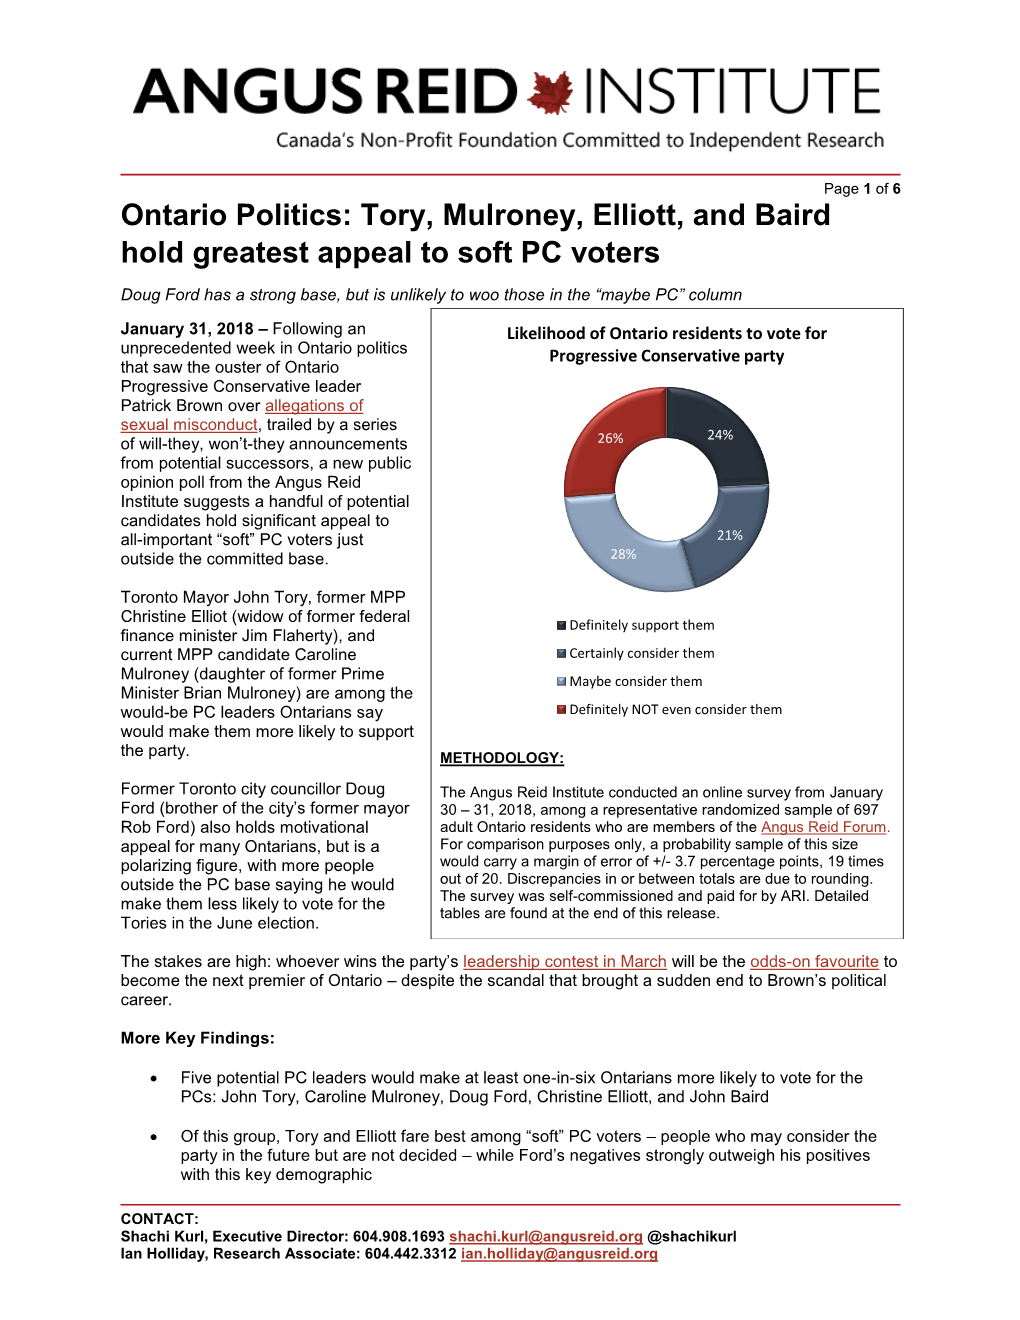 Ontario Politics: Tory, Mulroney, Elliott, and Baird Hold Greatest Appeal to Soft PC Voters